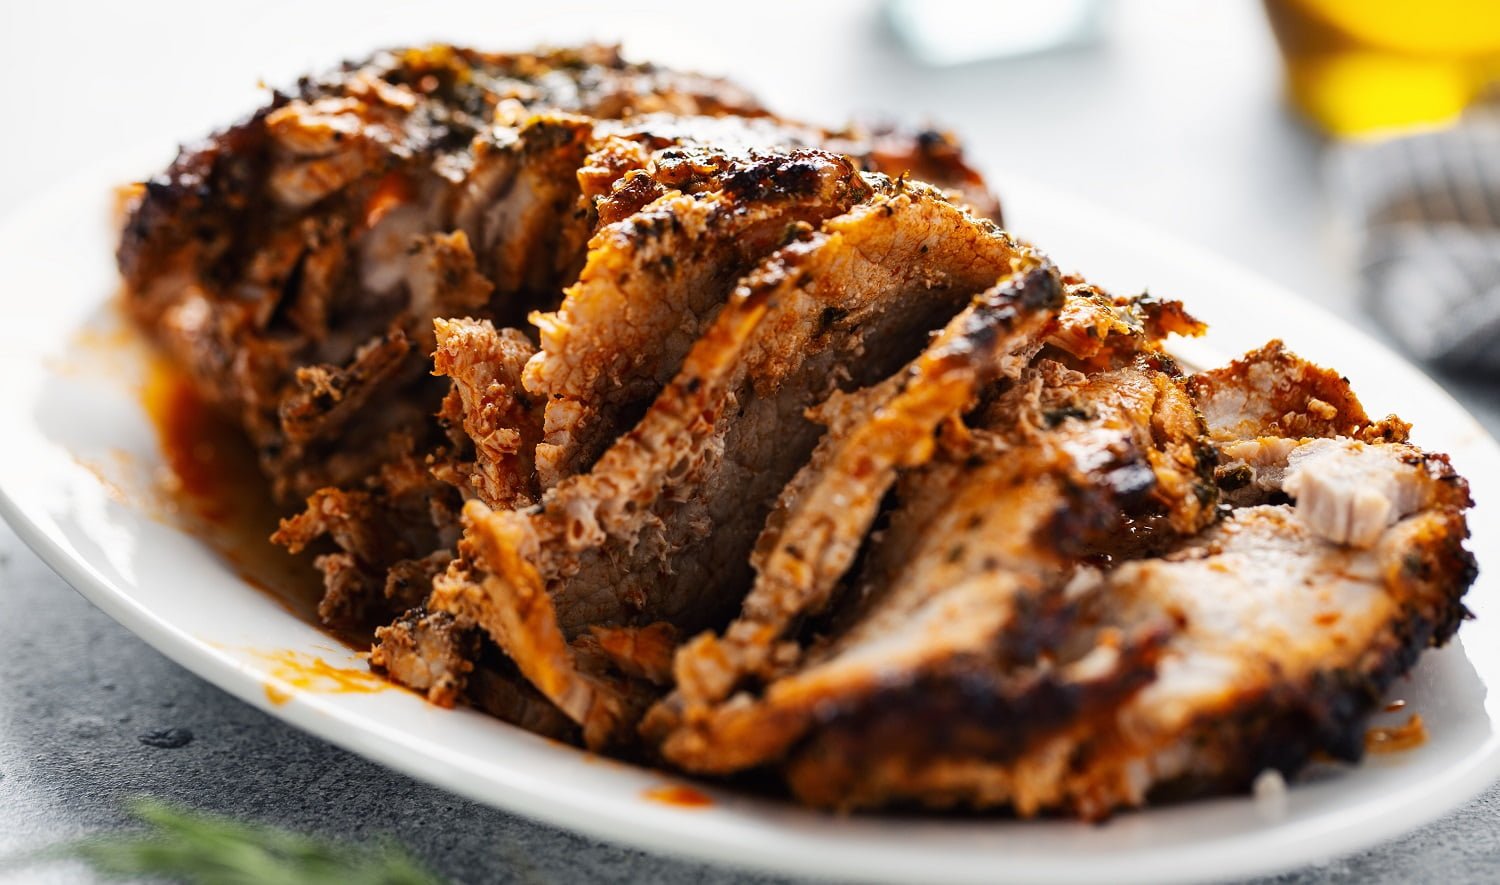 Tasty appetizing baked pork with spices and herbs. Closeup.